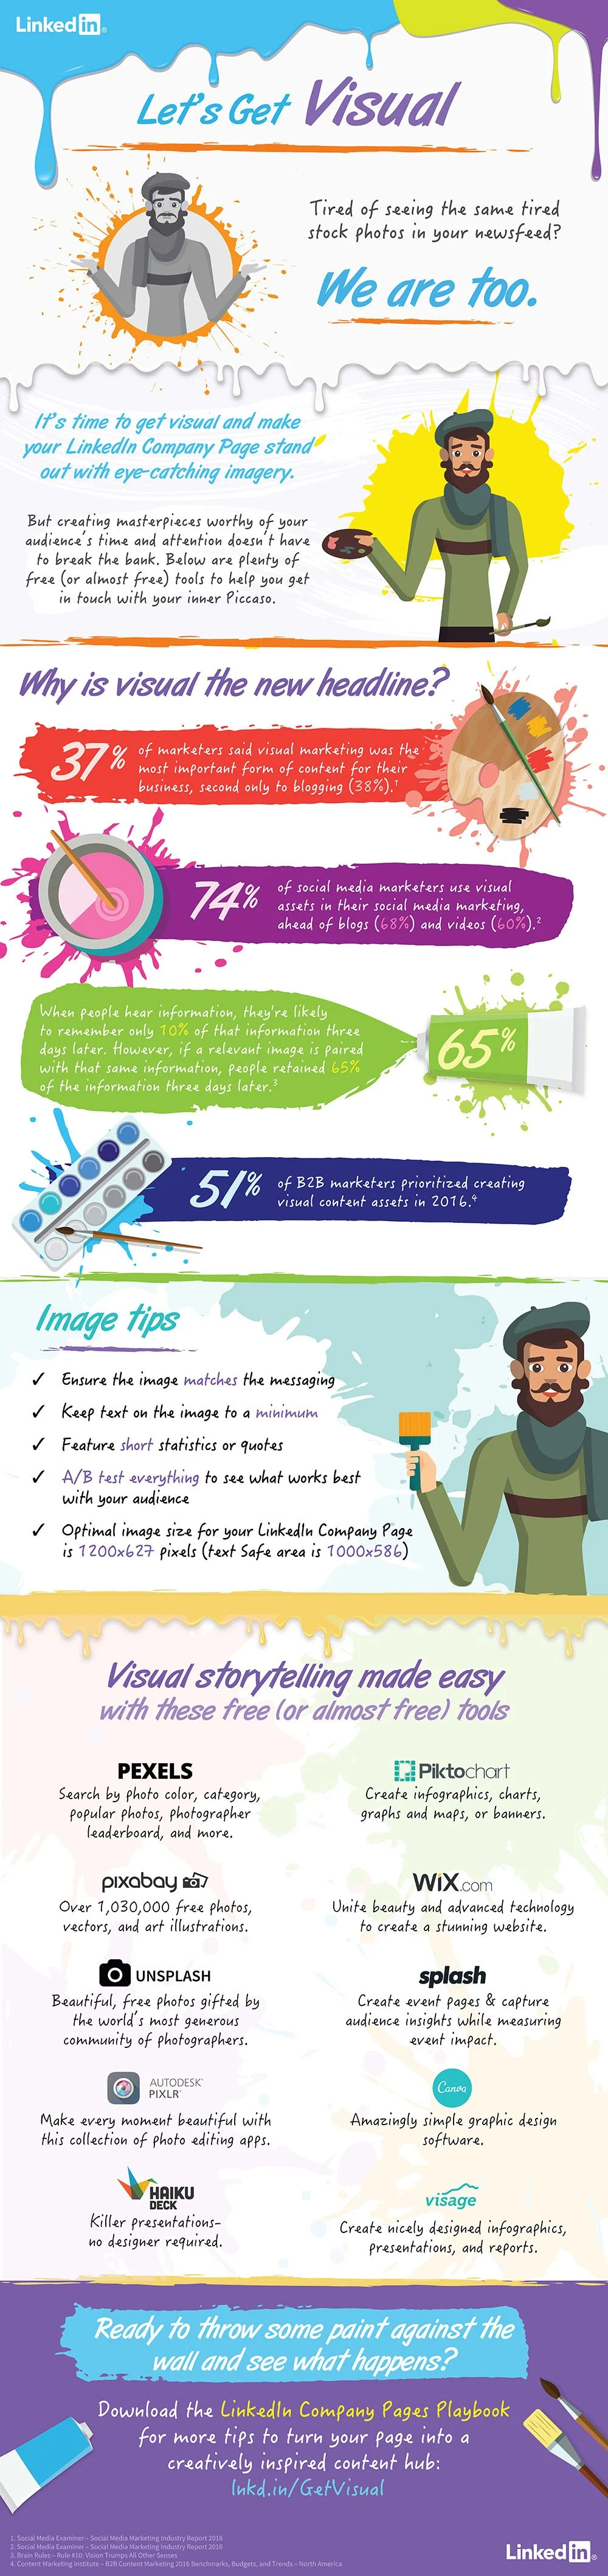 Let’s Get Visual: Company Page Managers - #Infographic